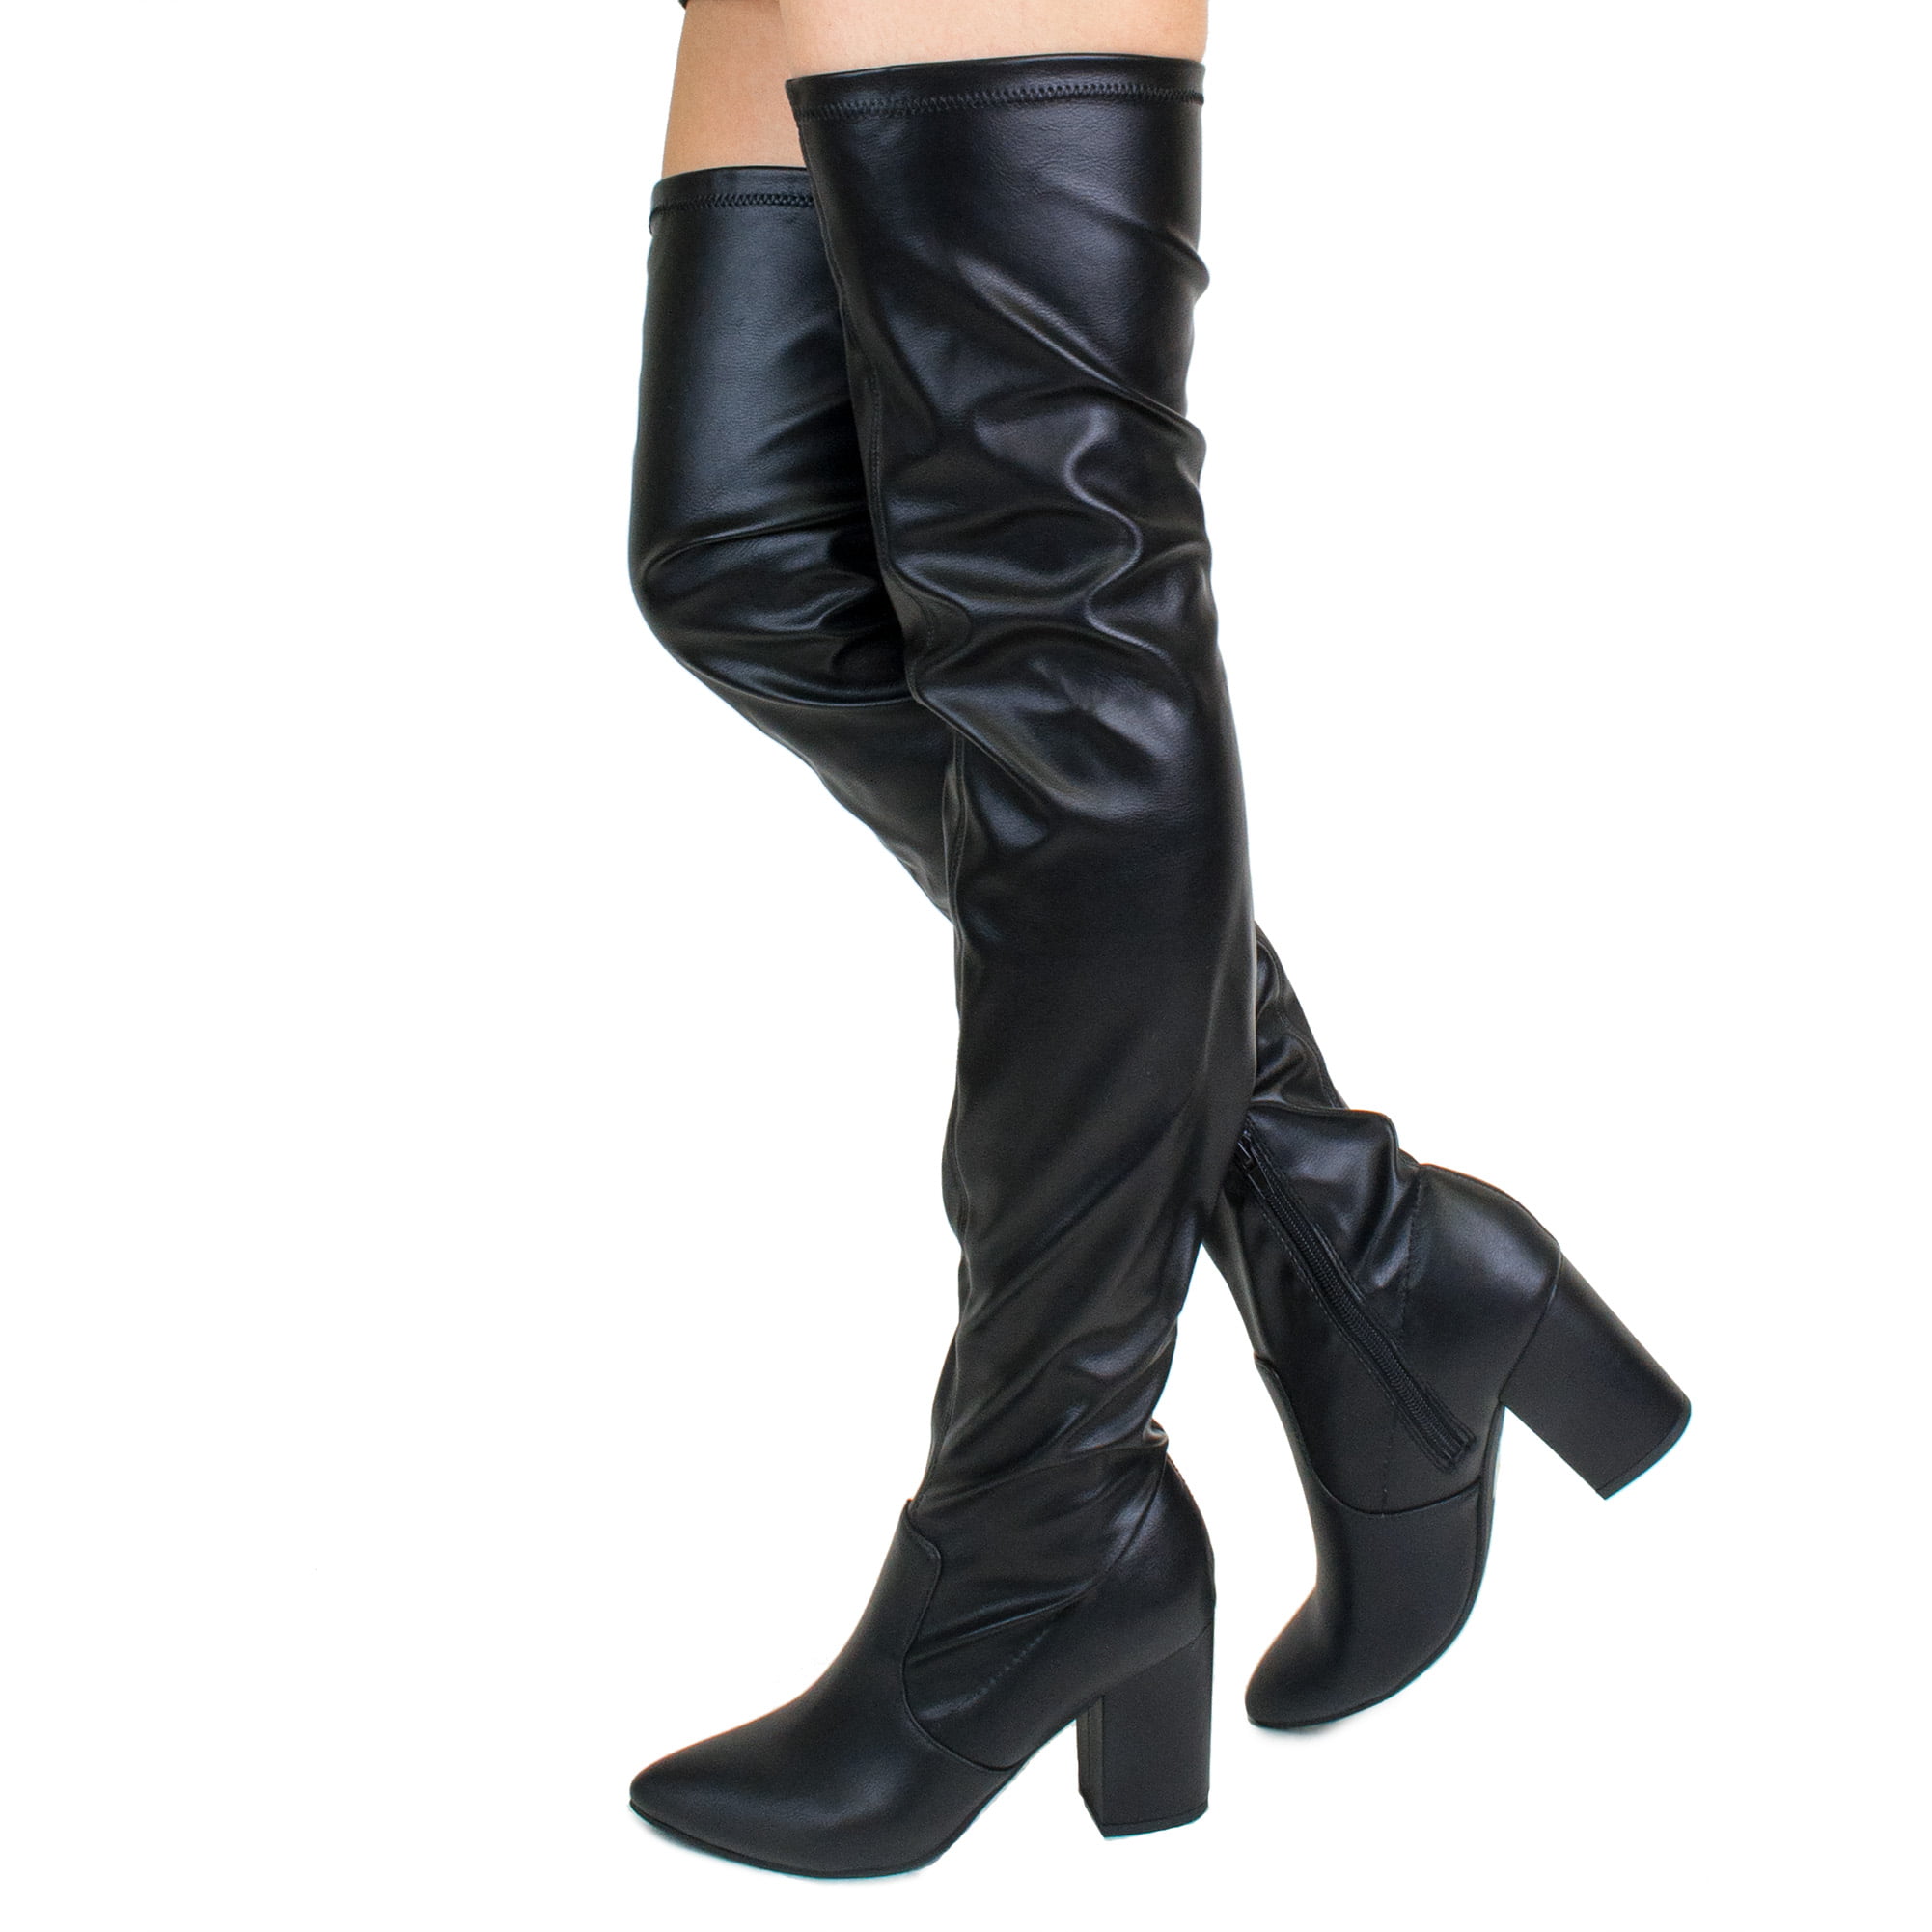 Women Over The Knee Boots Long Knee High Stretch Boots Block Low Heel Shoes 